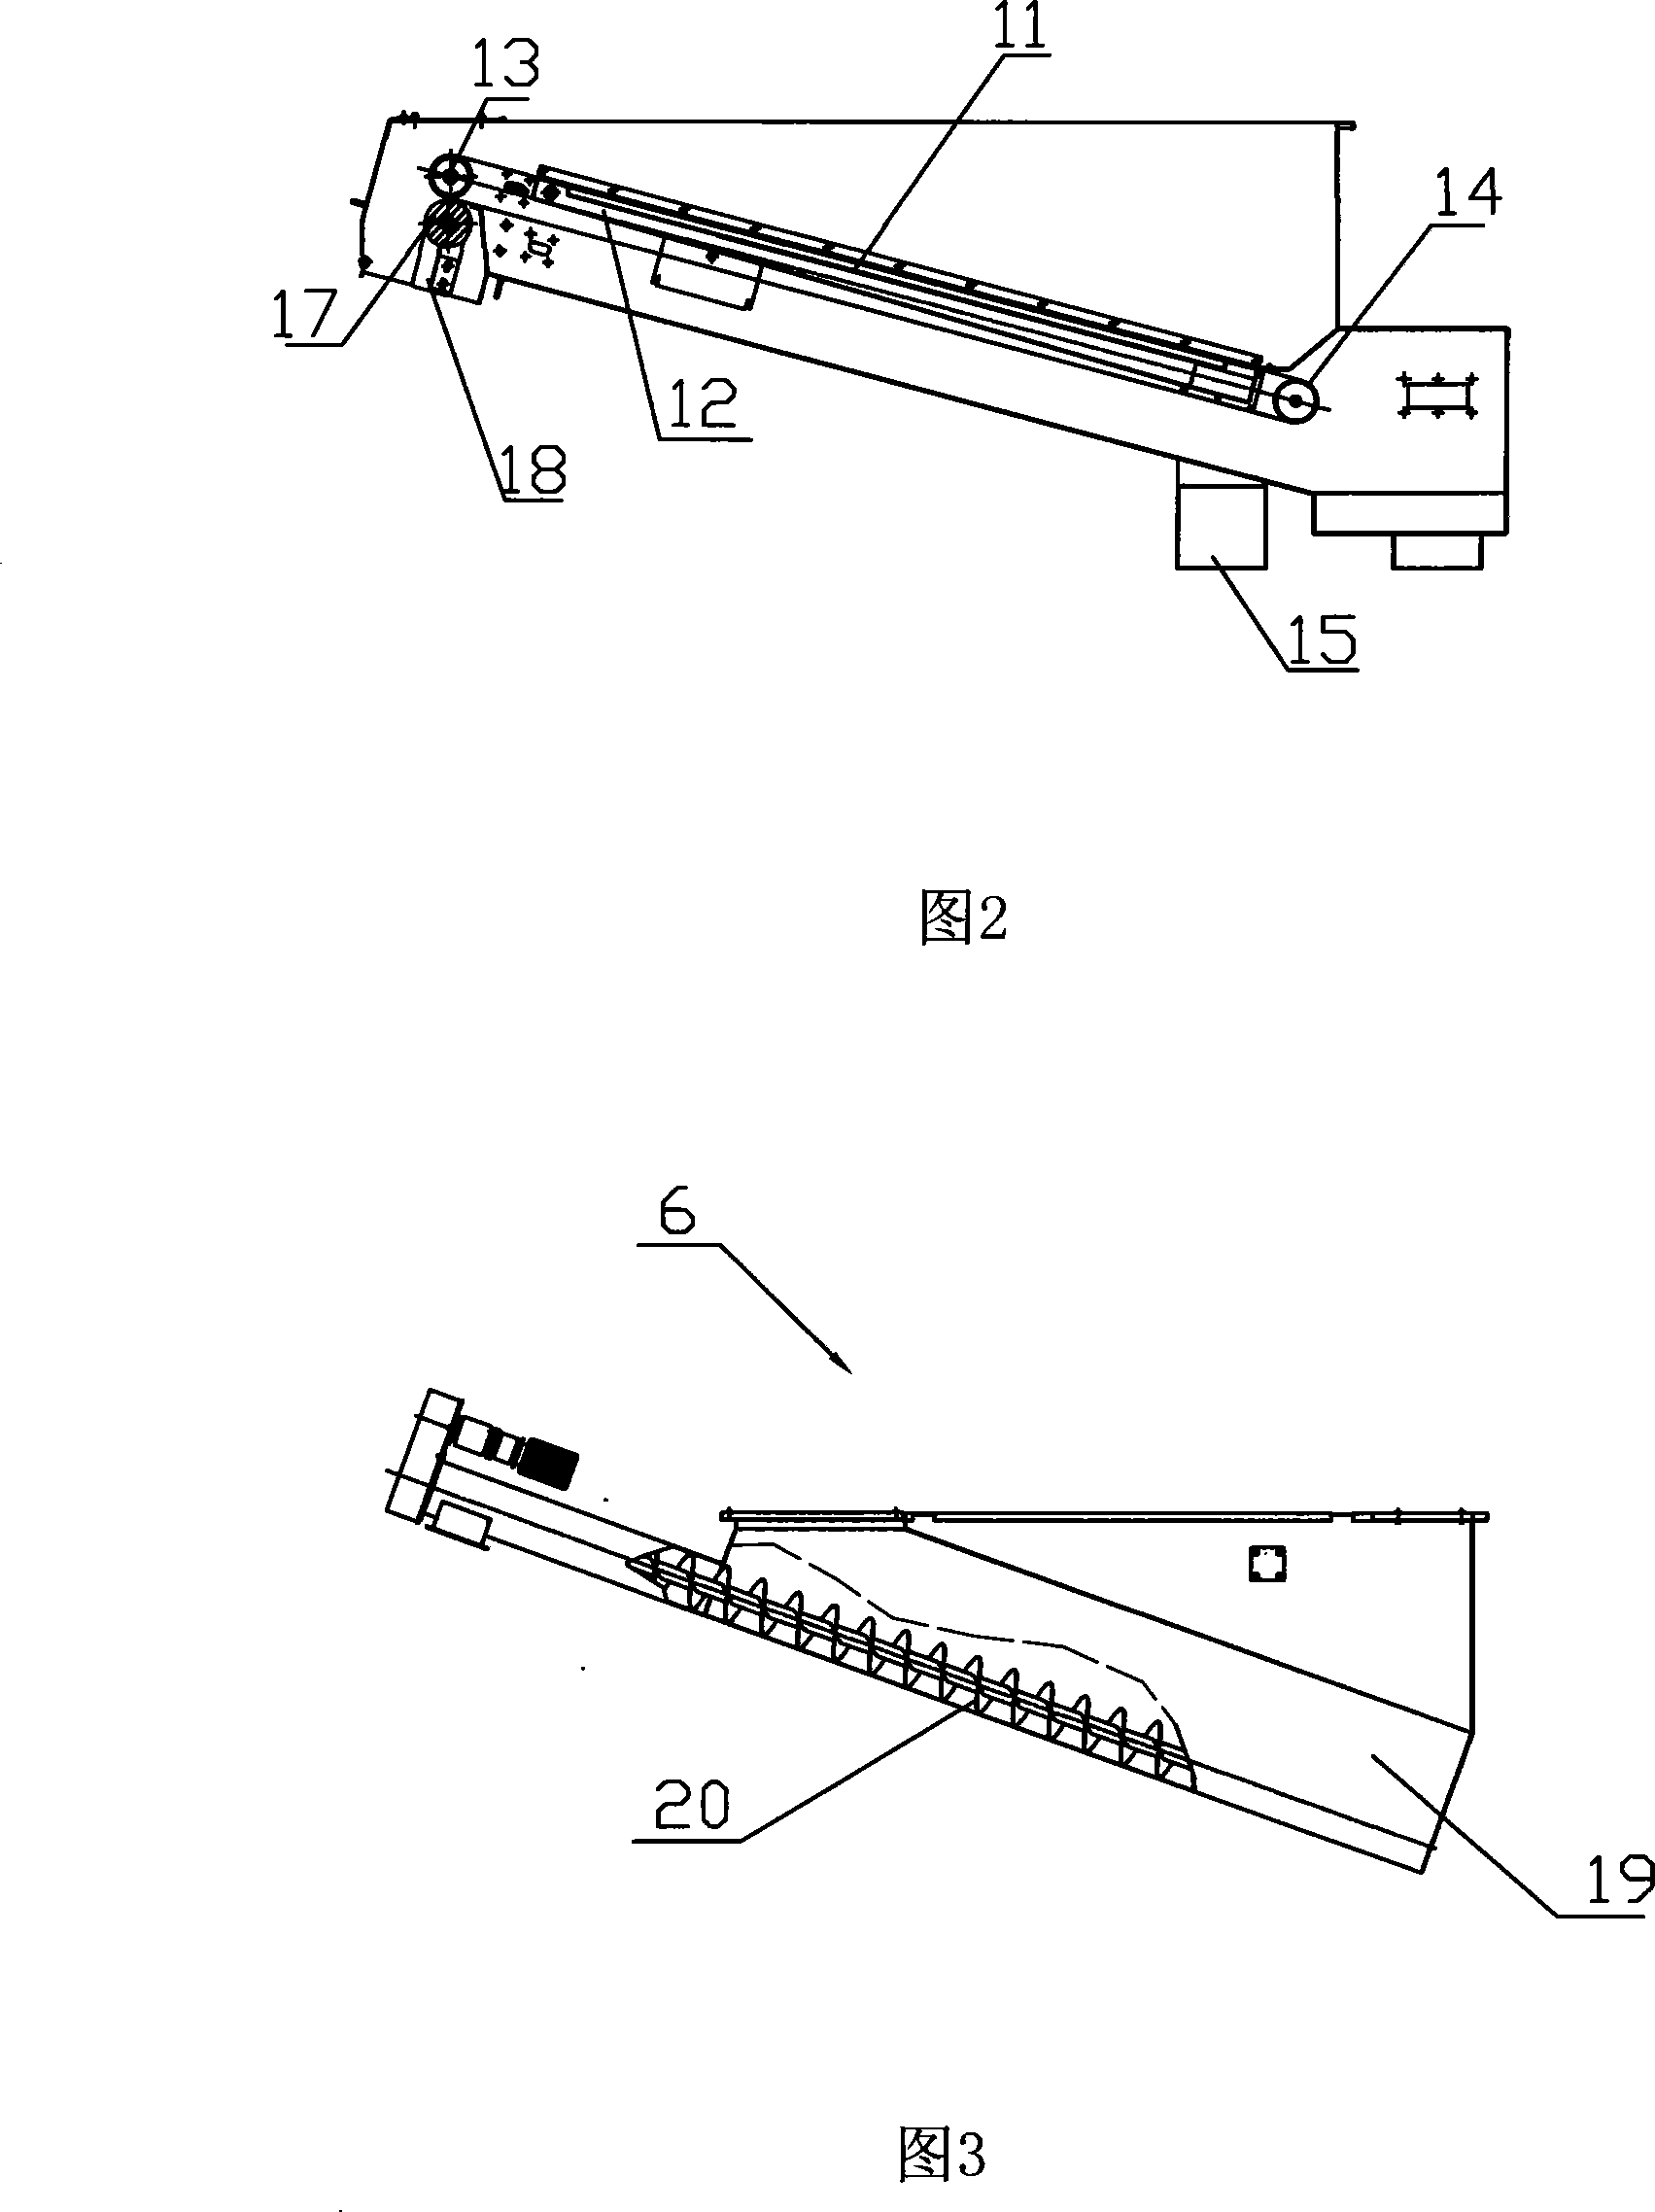 Device for treating polyester beverage bottle recycling sewage